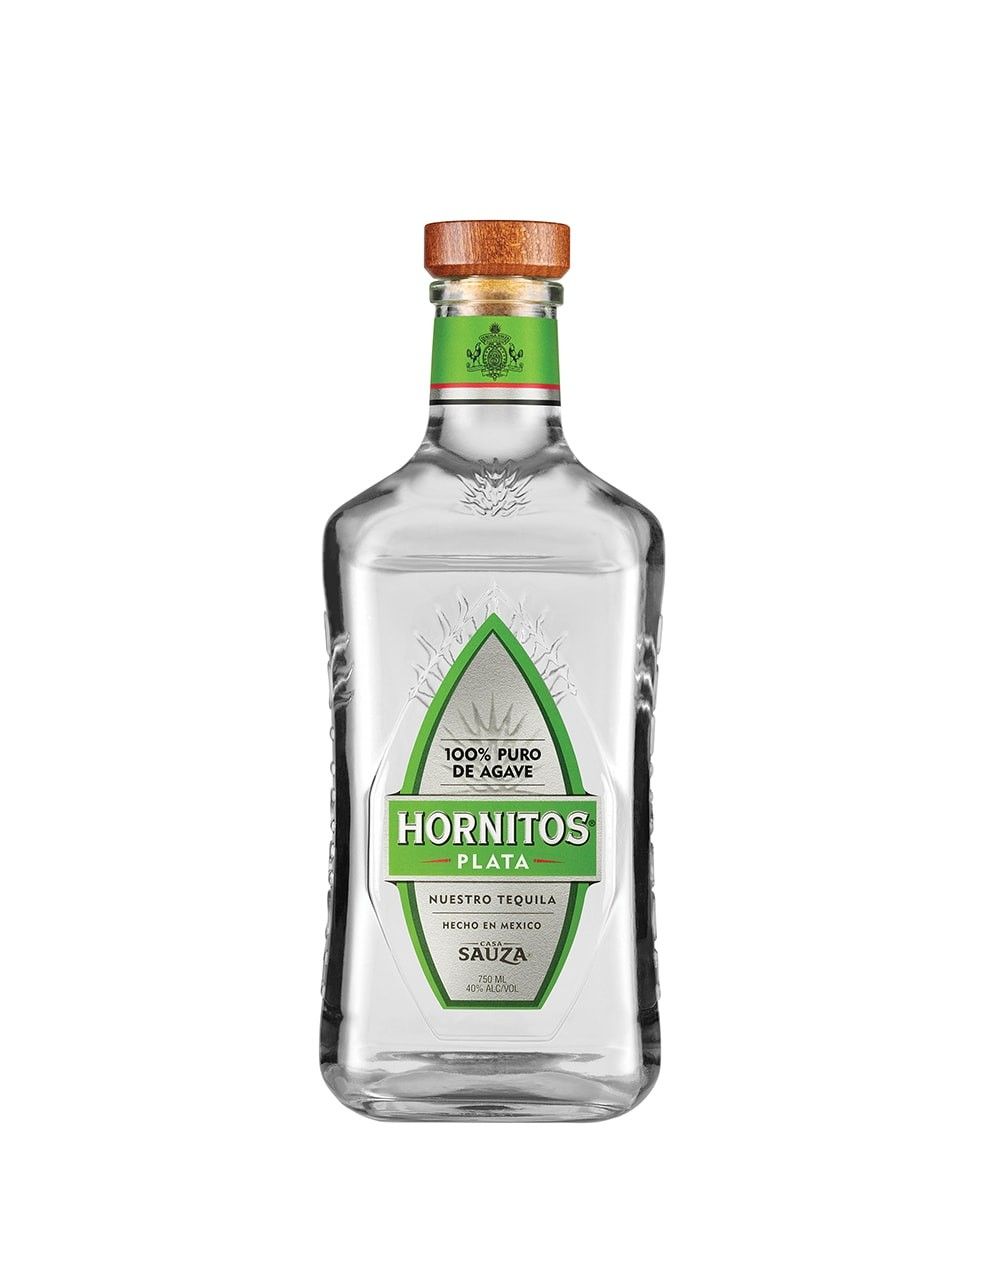 Hornitos® Plata Tequila | Buy Online or Send as a Gift